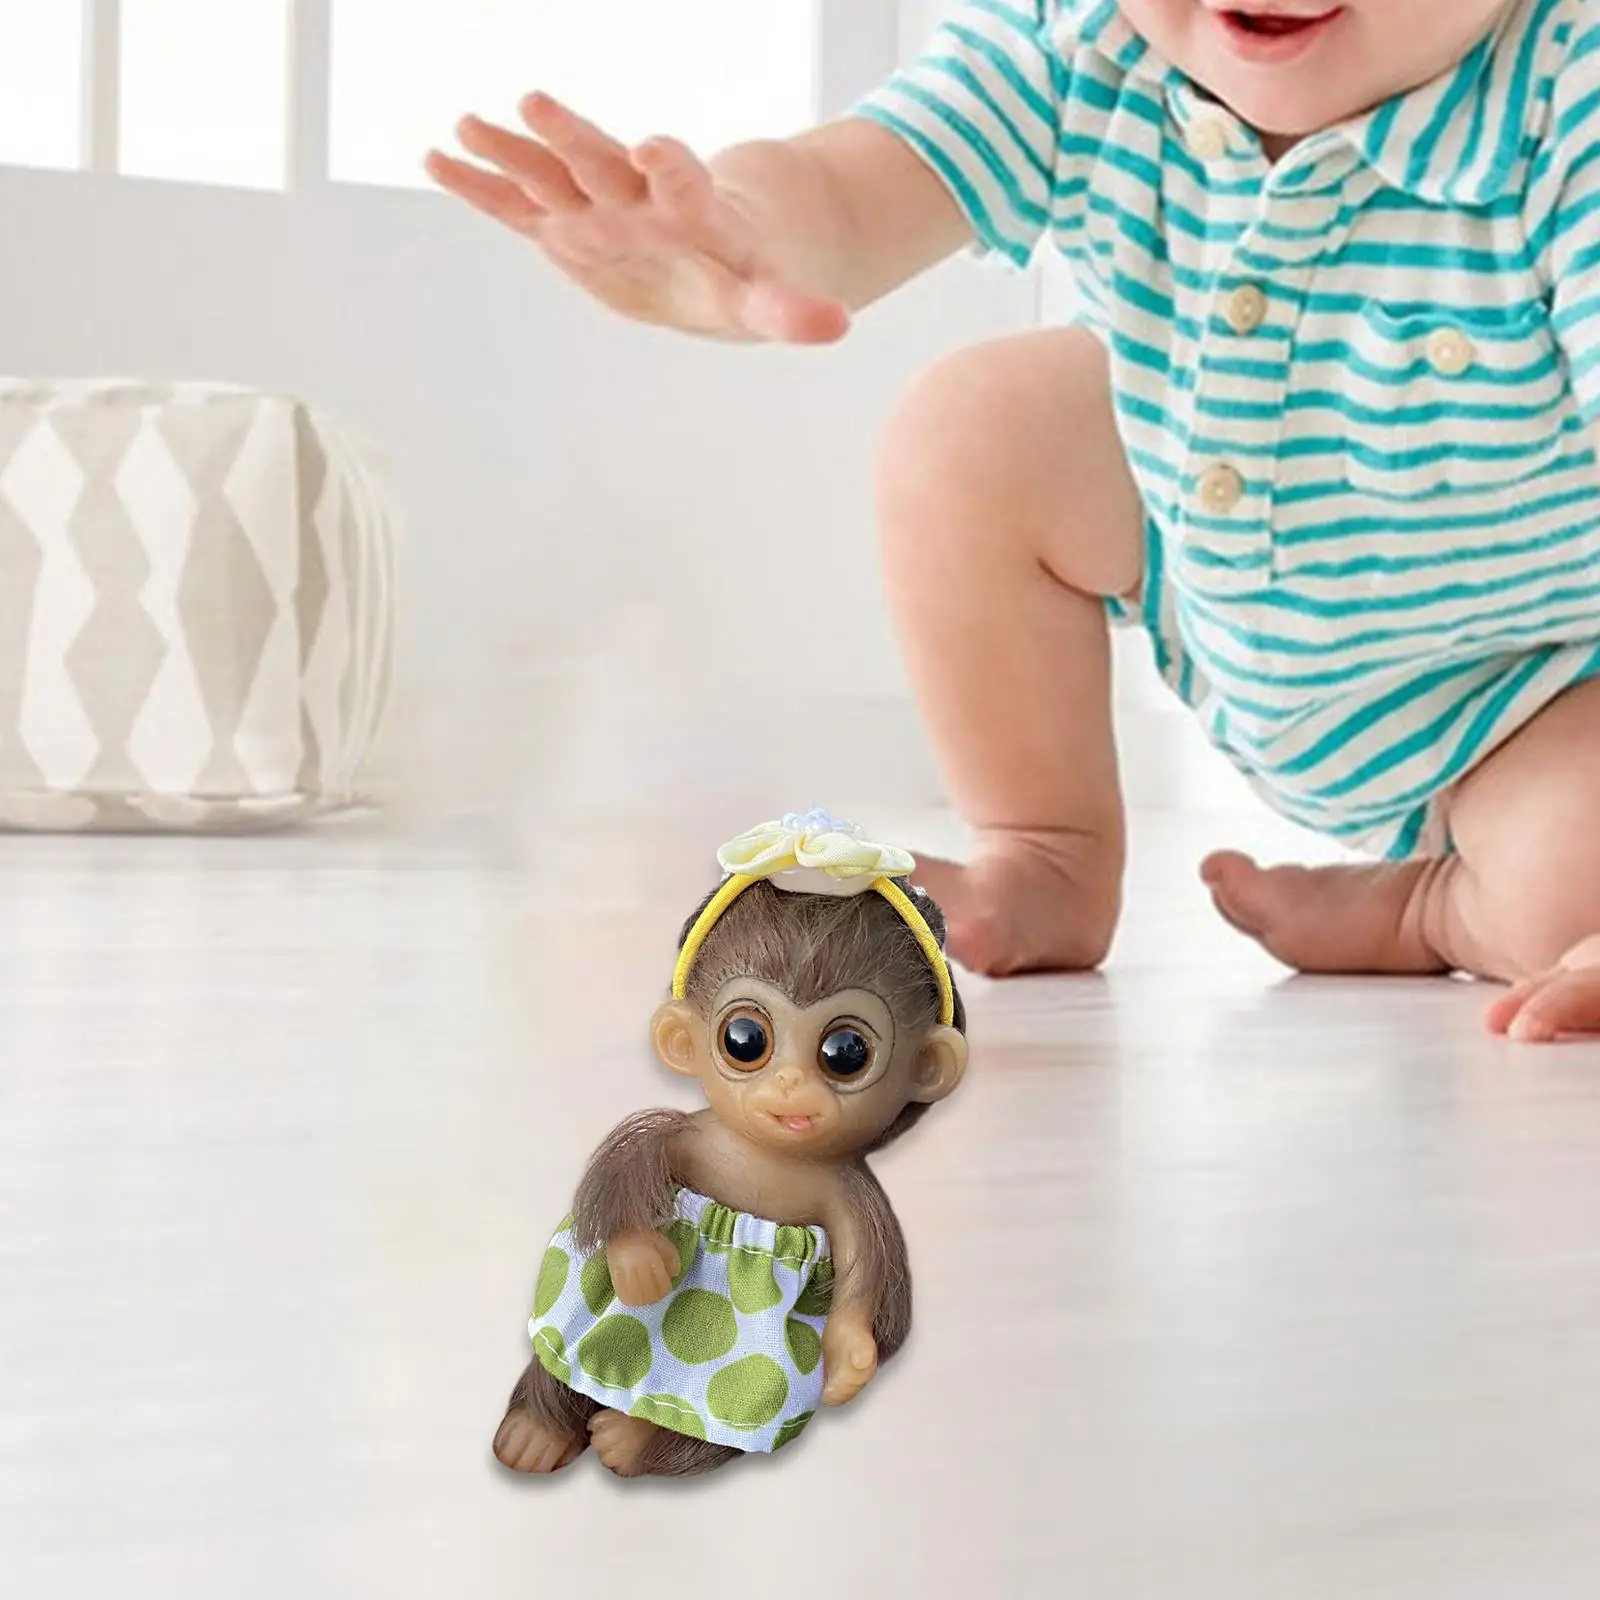 6inch Silicone Realistic Monkey Soft Waterproof for Toddlers Birthday Gift